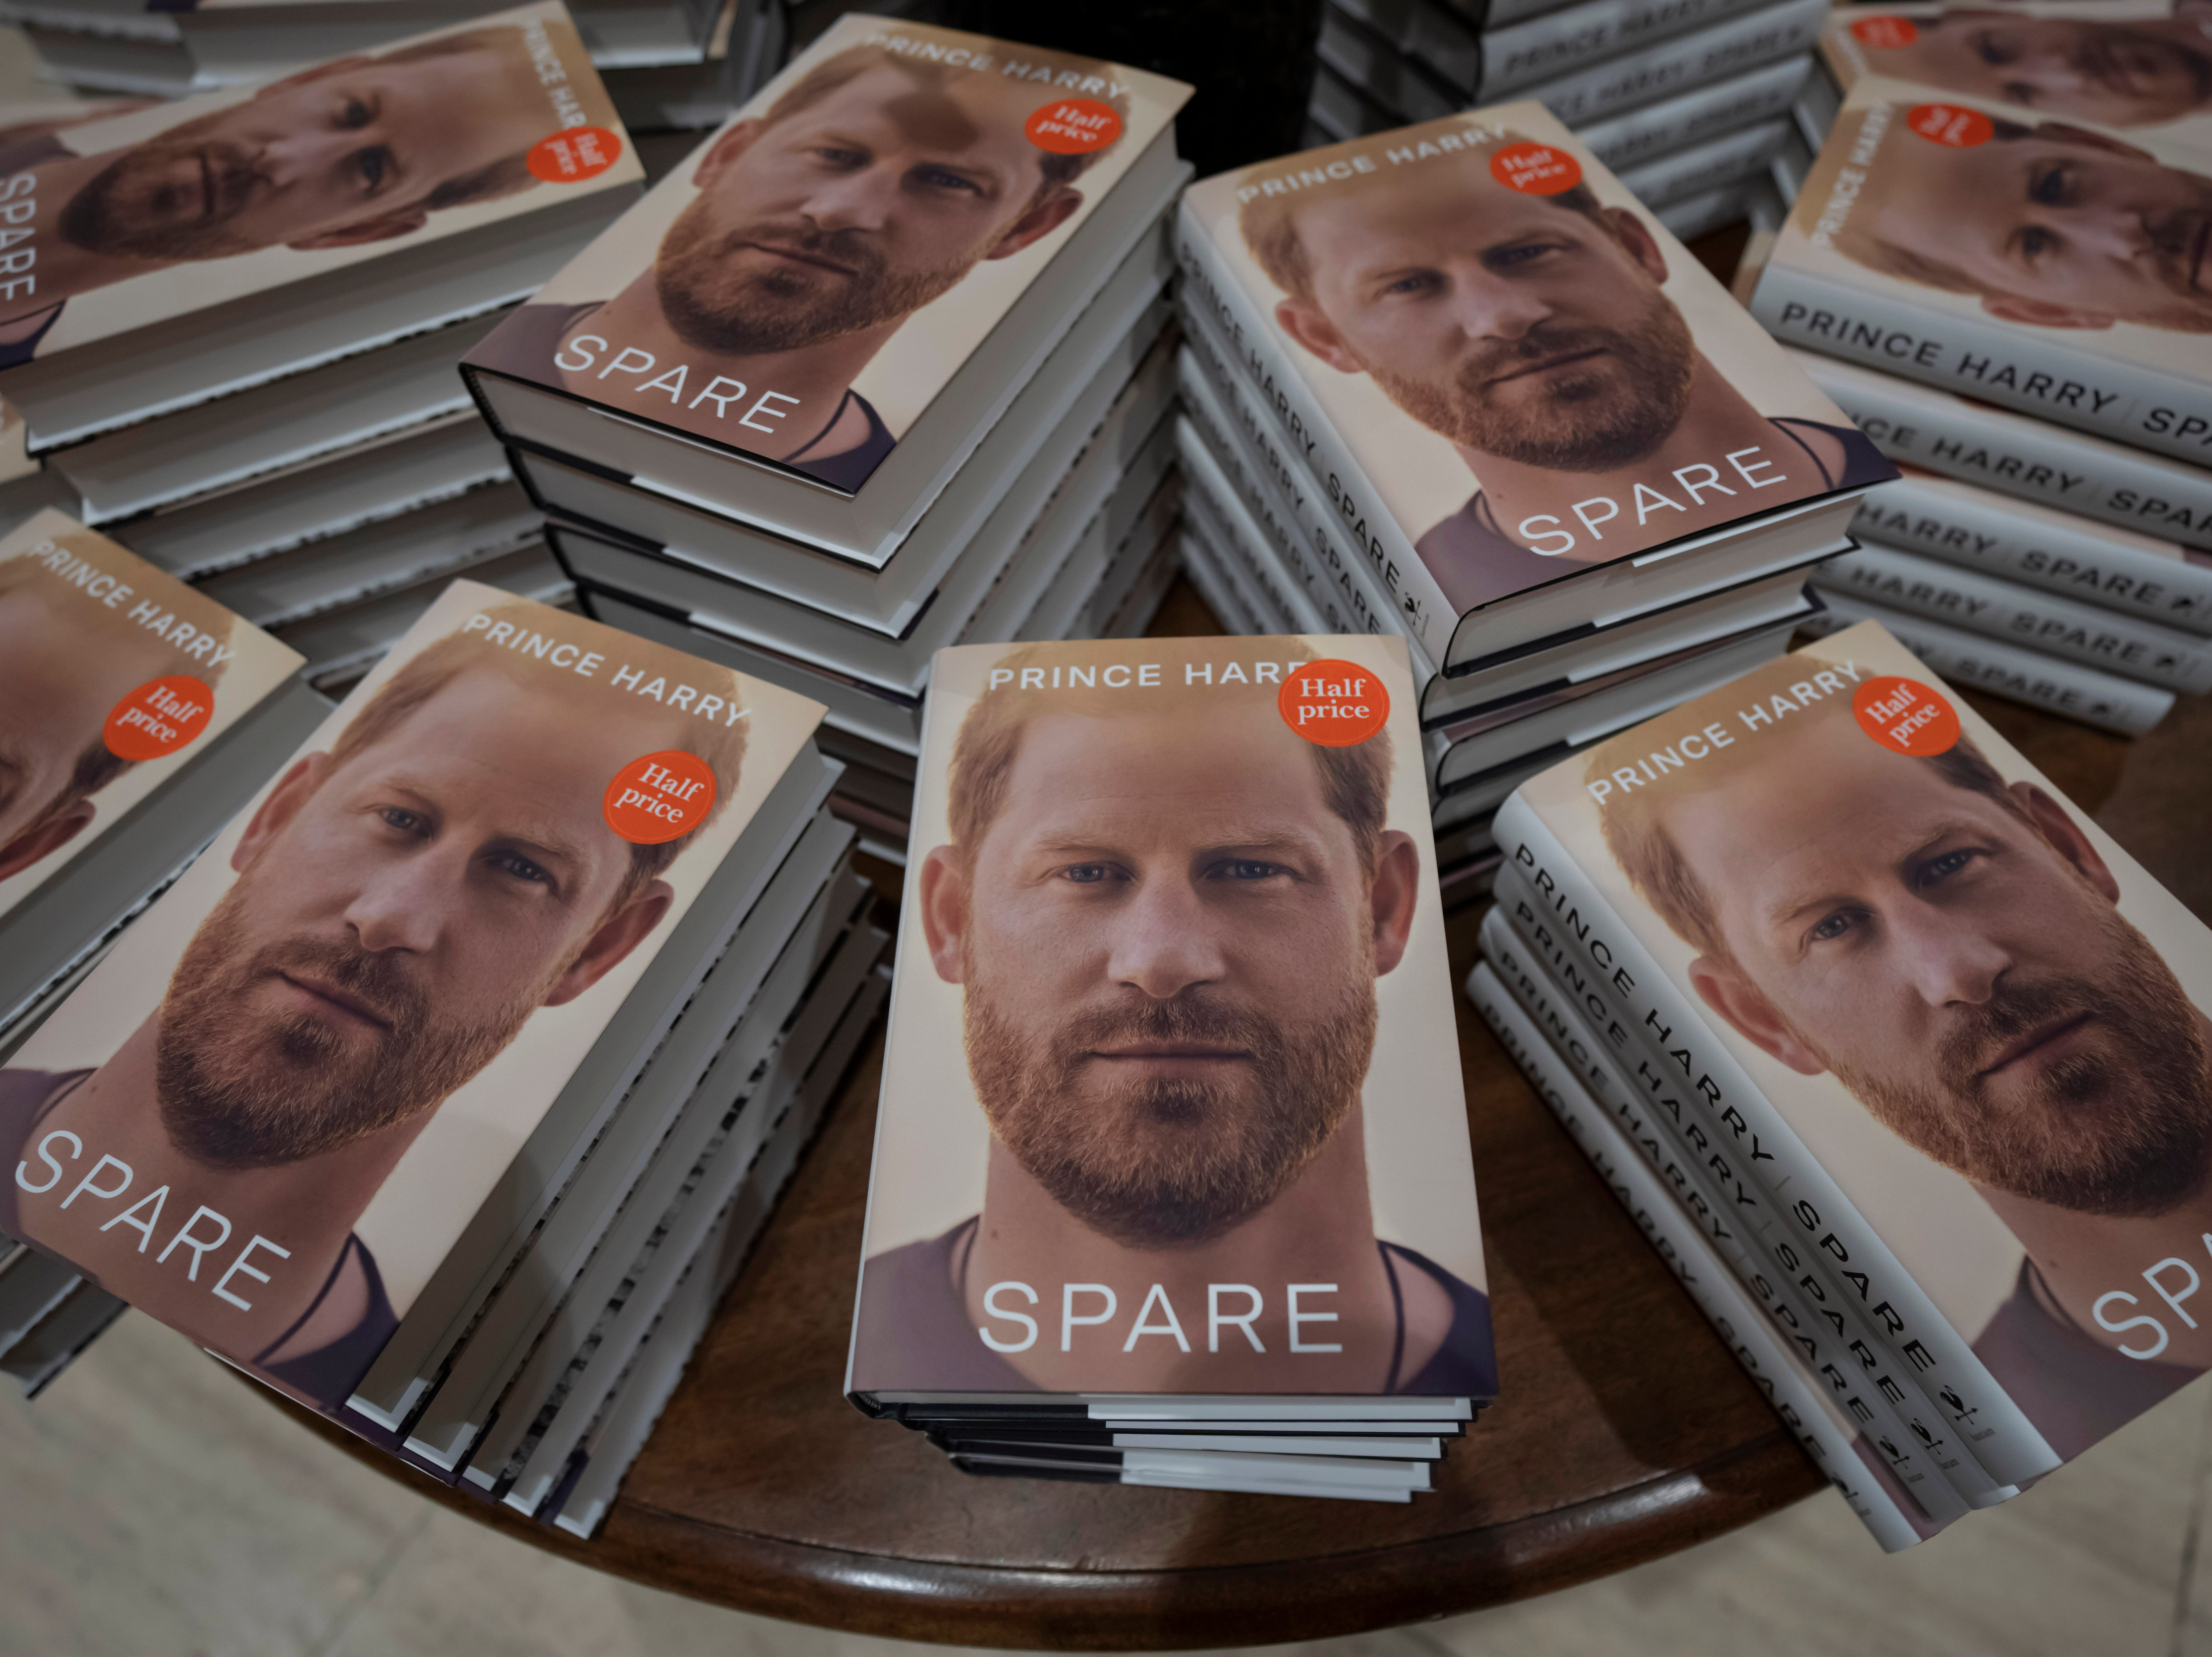 Copies of the new book by Prince Harry - Spare - are displayed at a book store in London (AP Photo/Kin Cheung)